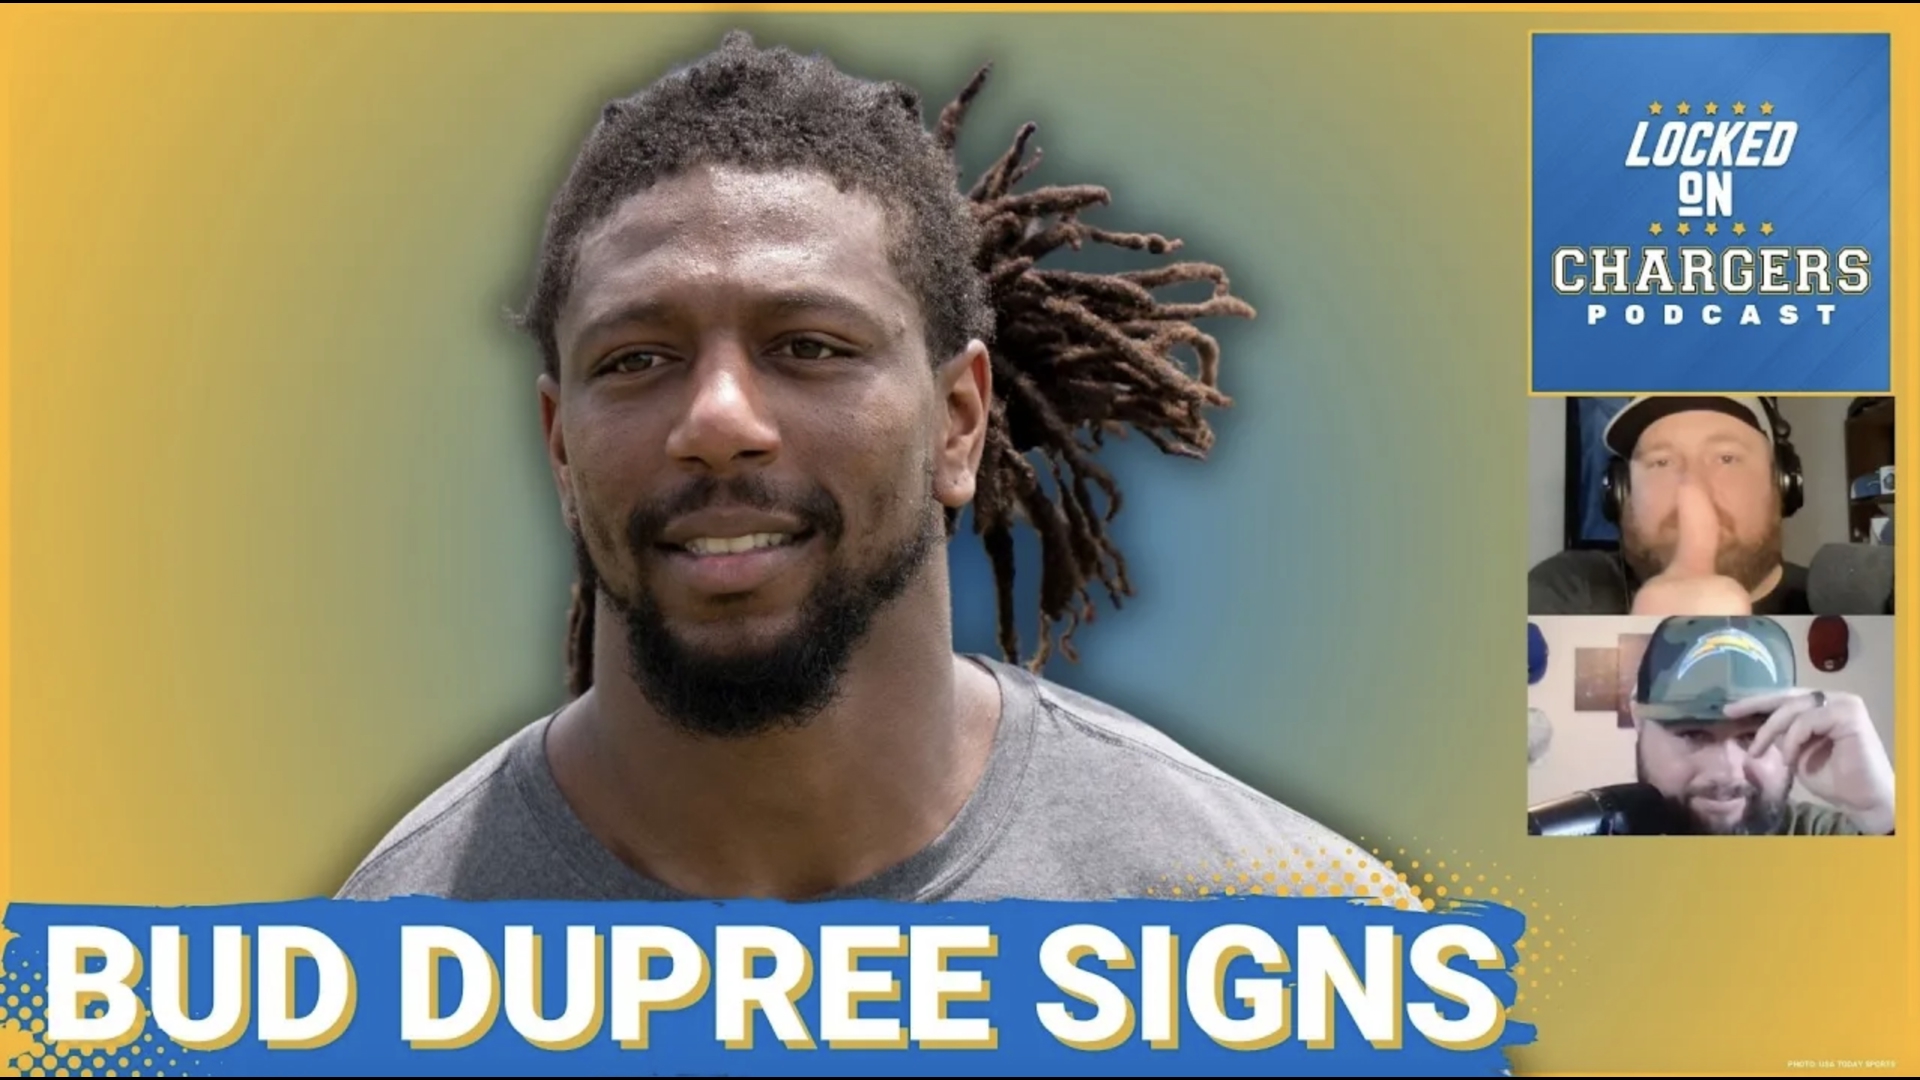 Opposing quarterbacks beware because with the Chargers signing Bud Dupree, no one is safe from what is now the deepest group of edge rushers in the league.